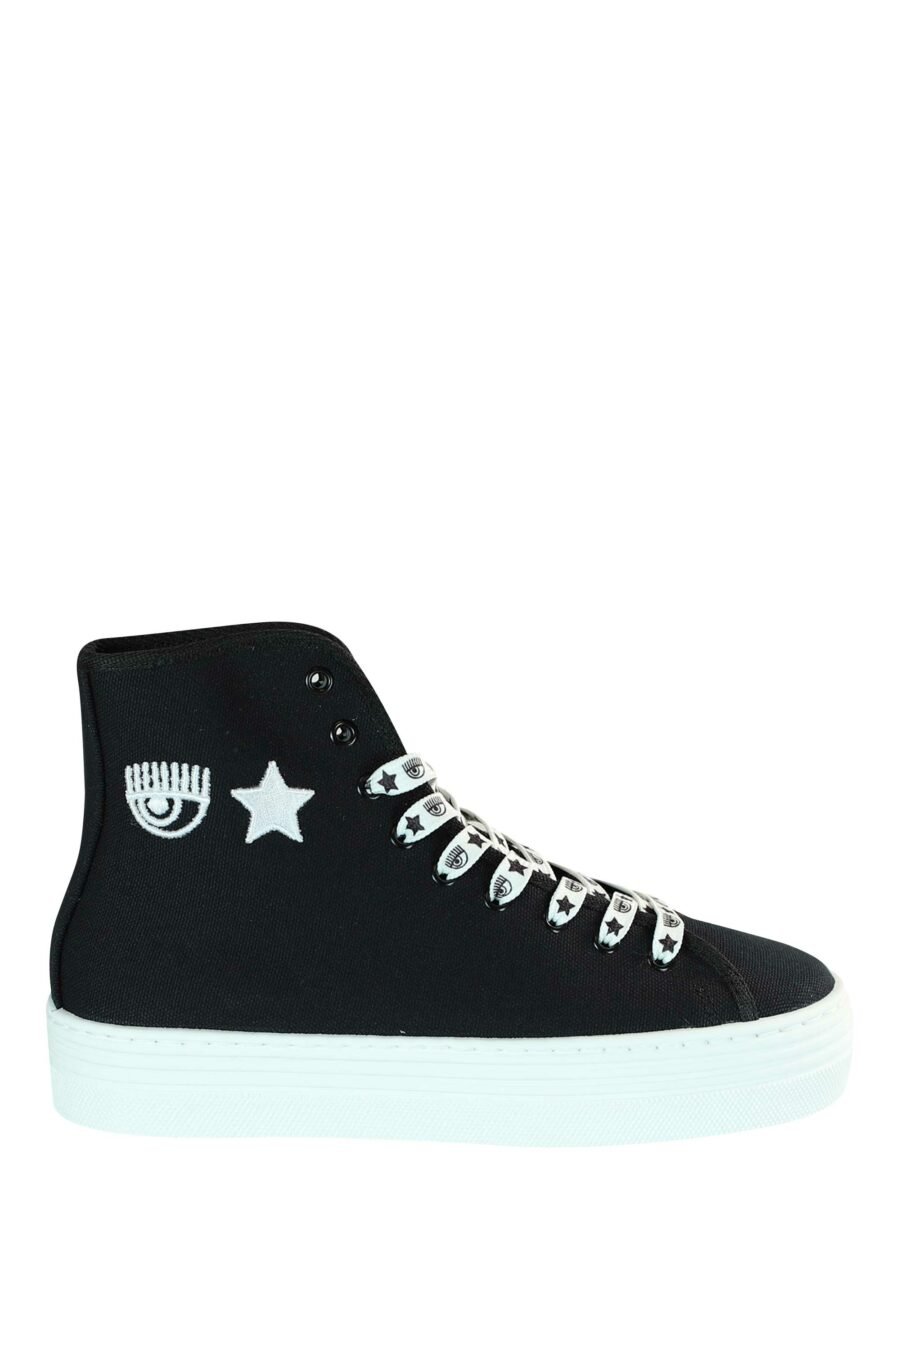 Black high top trainers with platform and embroidered star and eye logo - 8059388229093